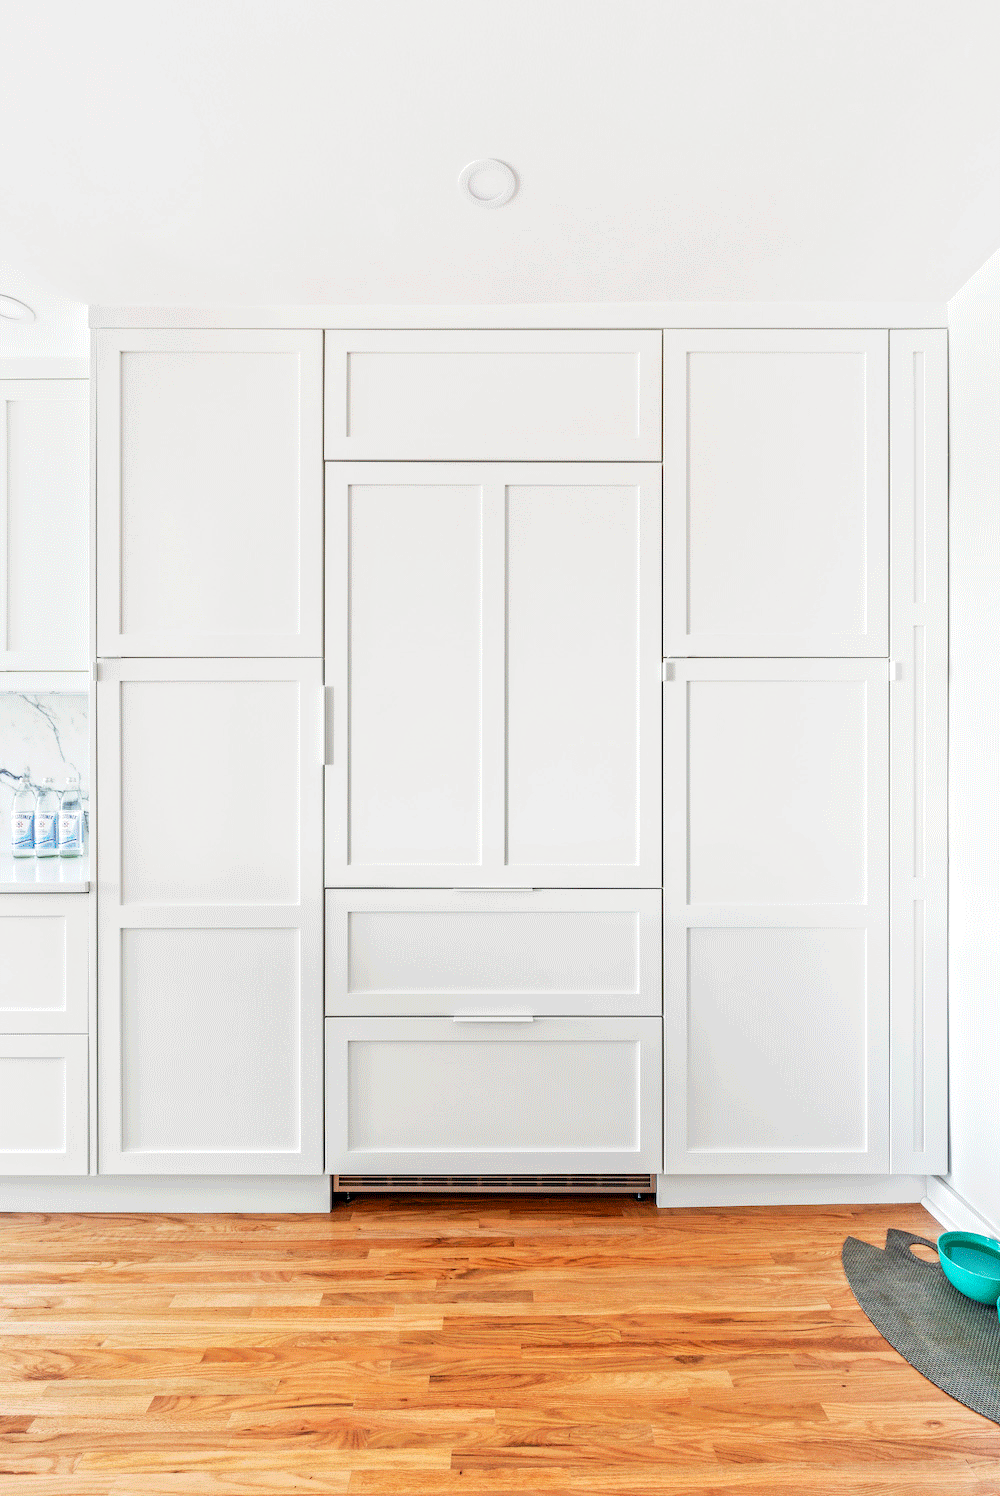 integrated refrigerator and cabinet storage